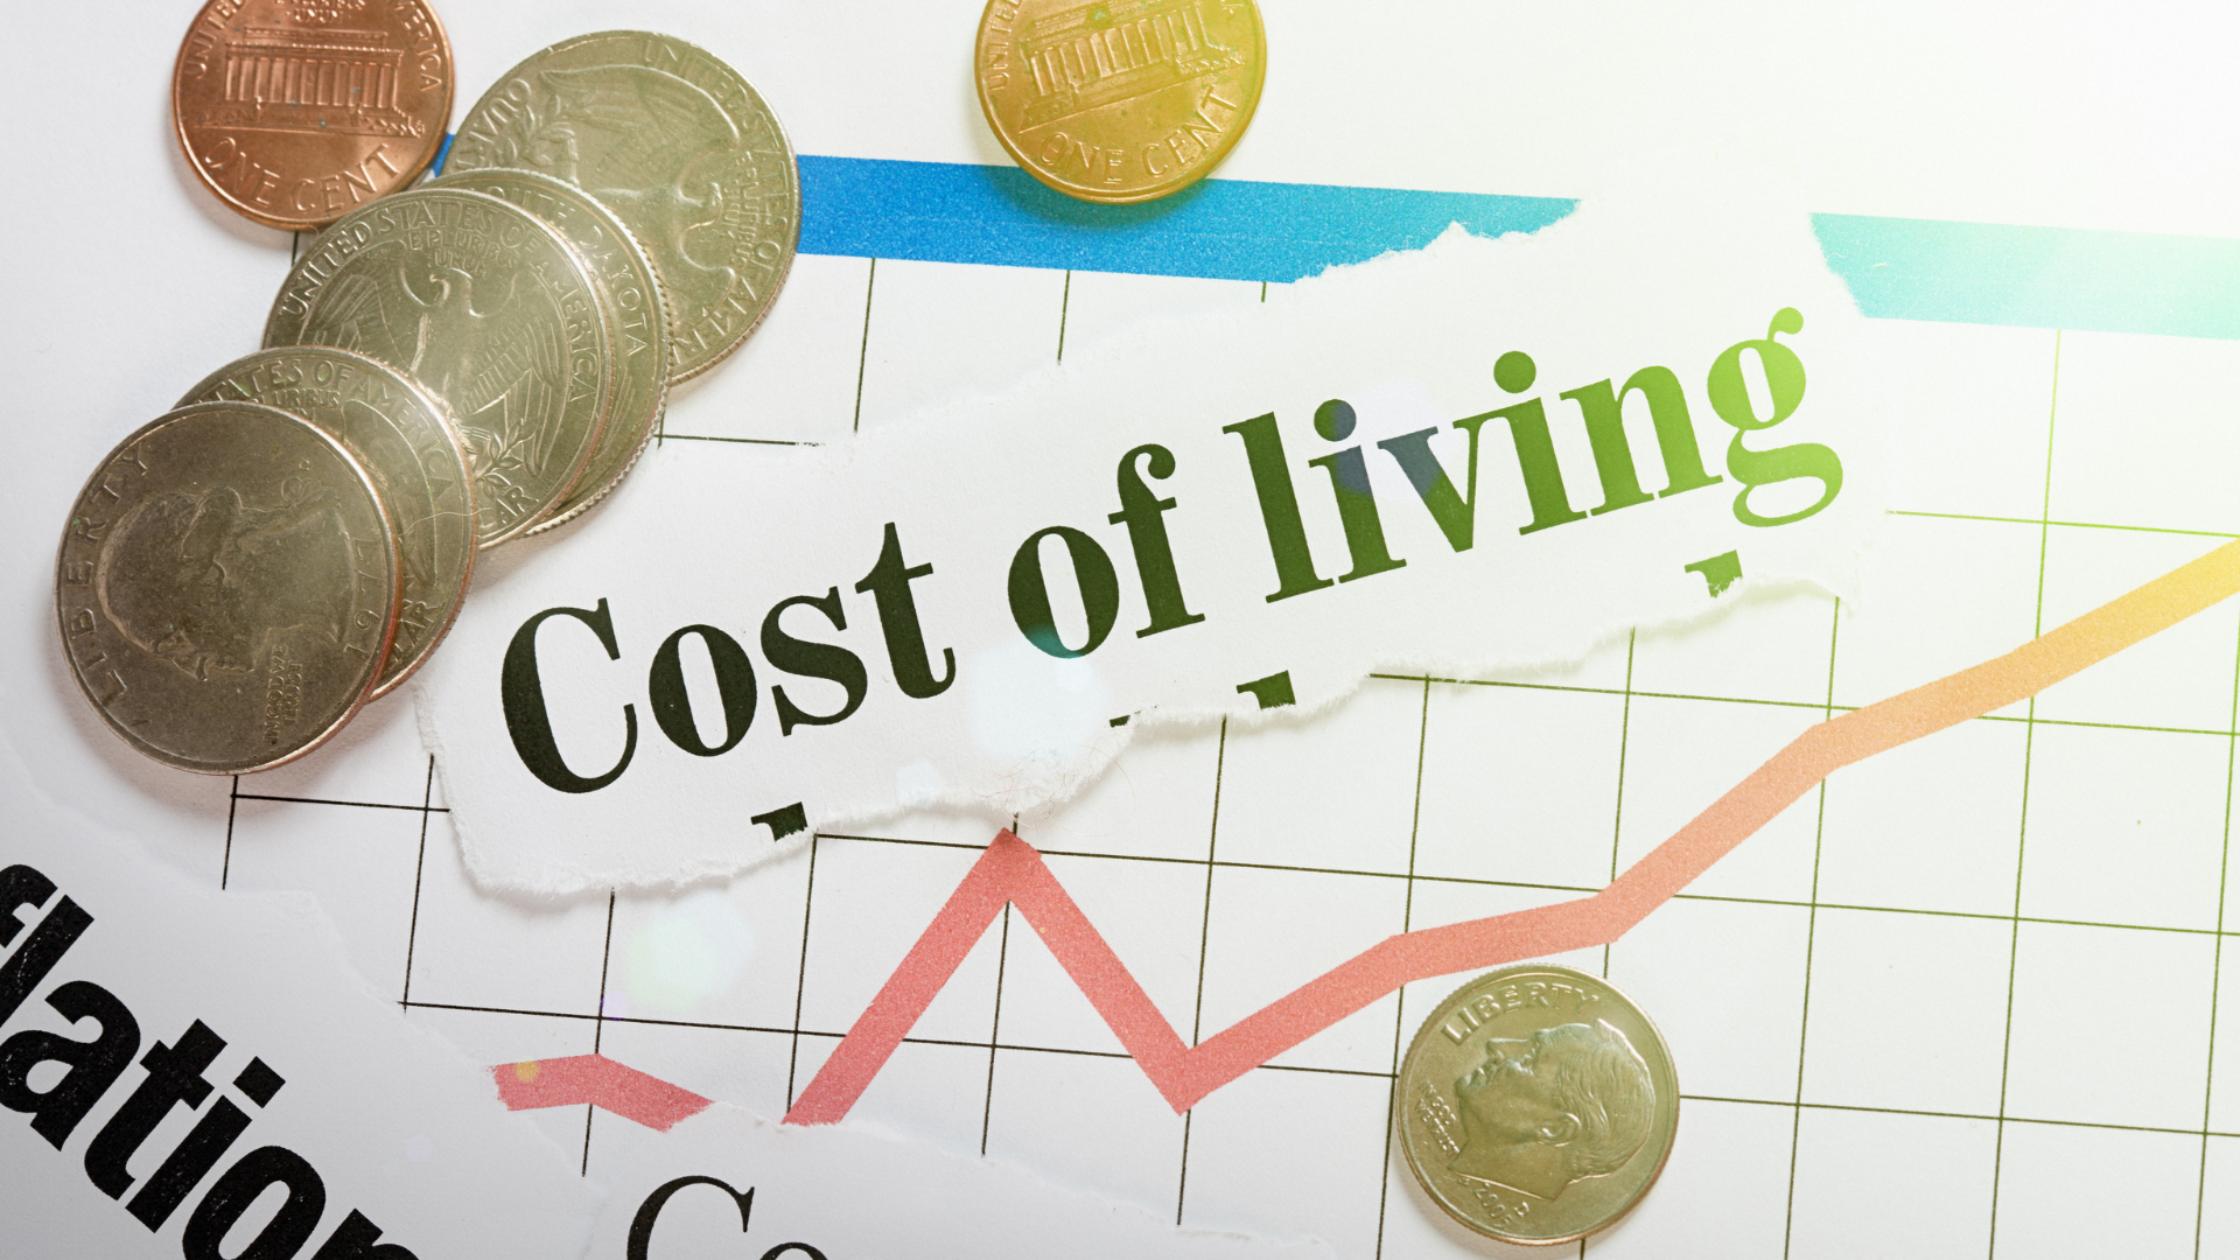 Refinance related, cost of living written with coins and inflation chart line